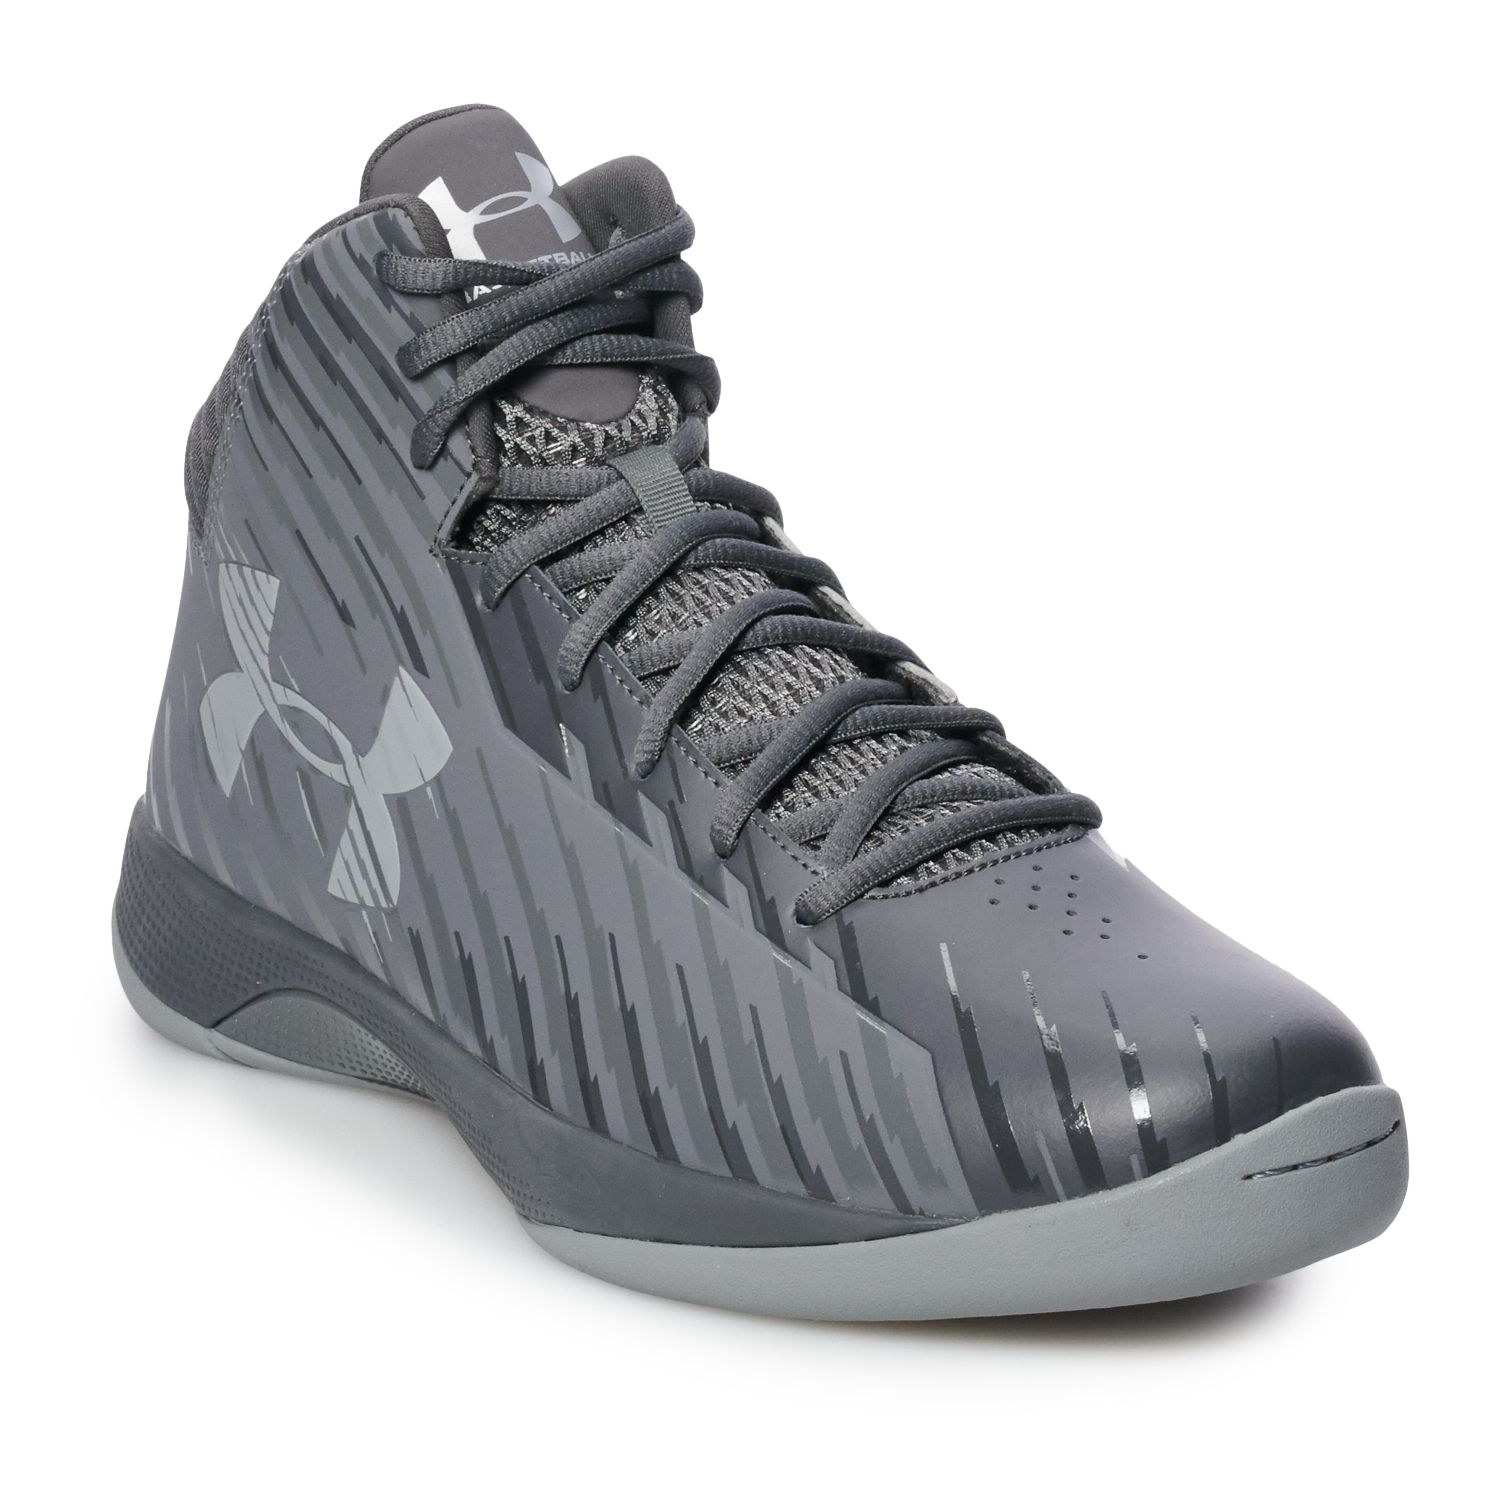 under armor basket ball shoes